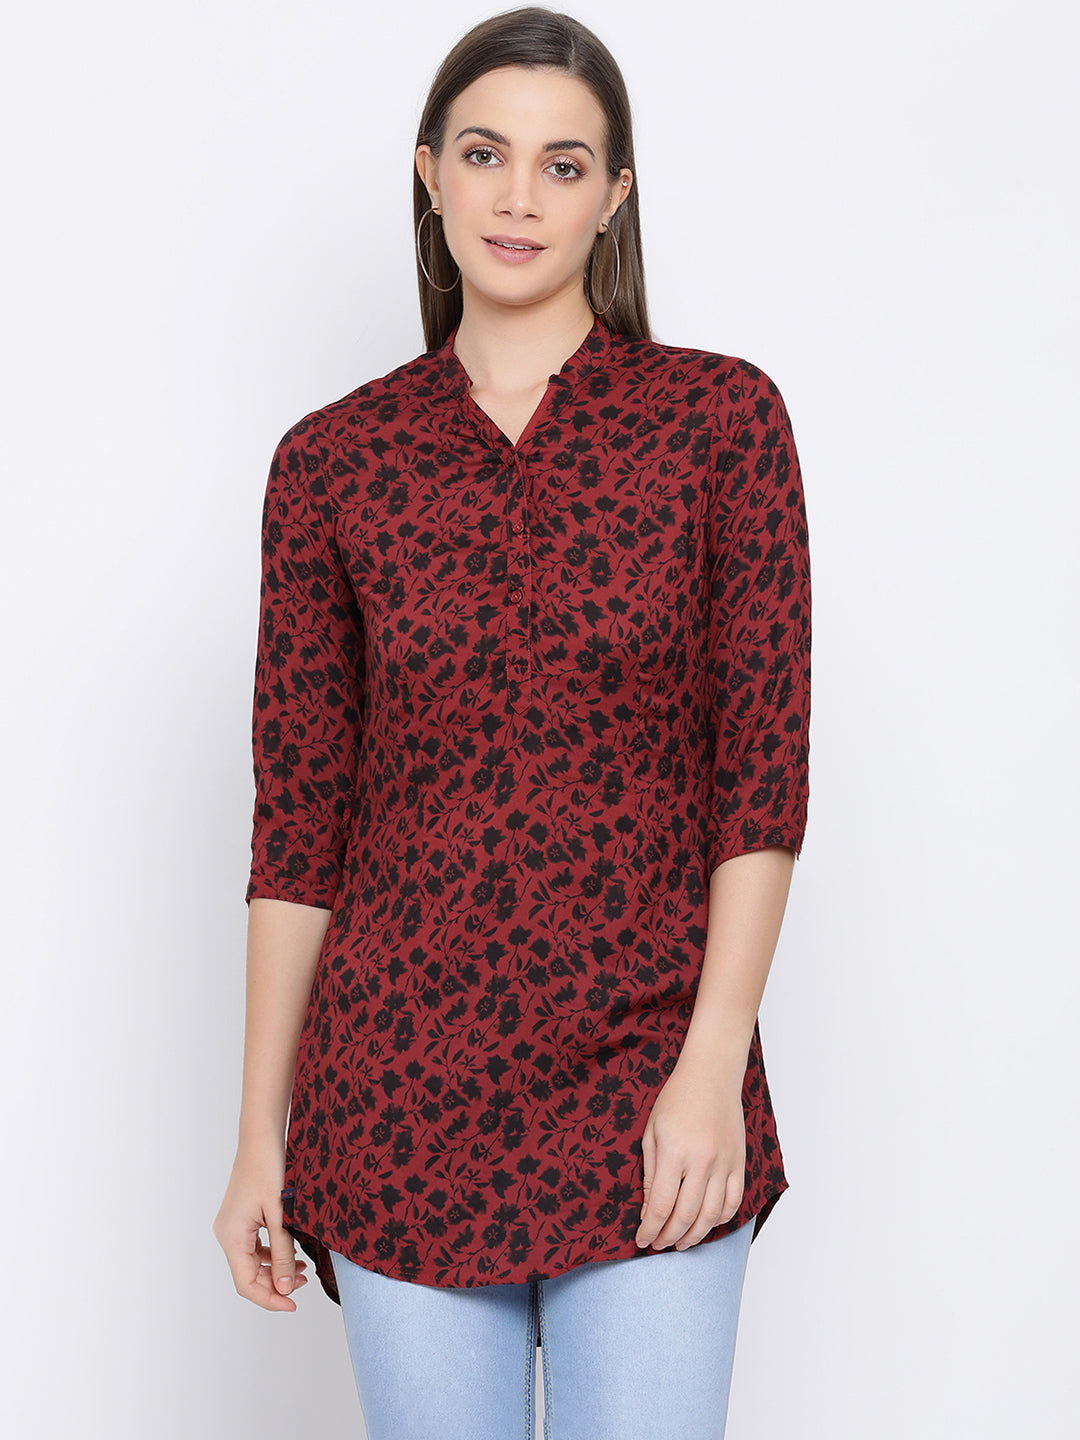 Red Printed V-Neck Top - Women Tops